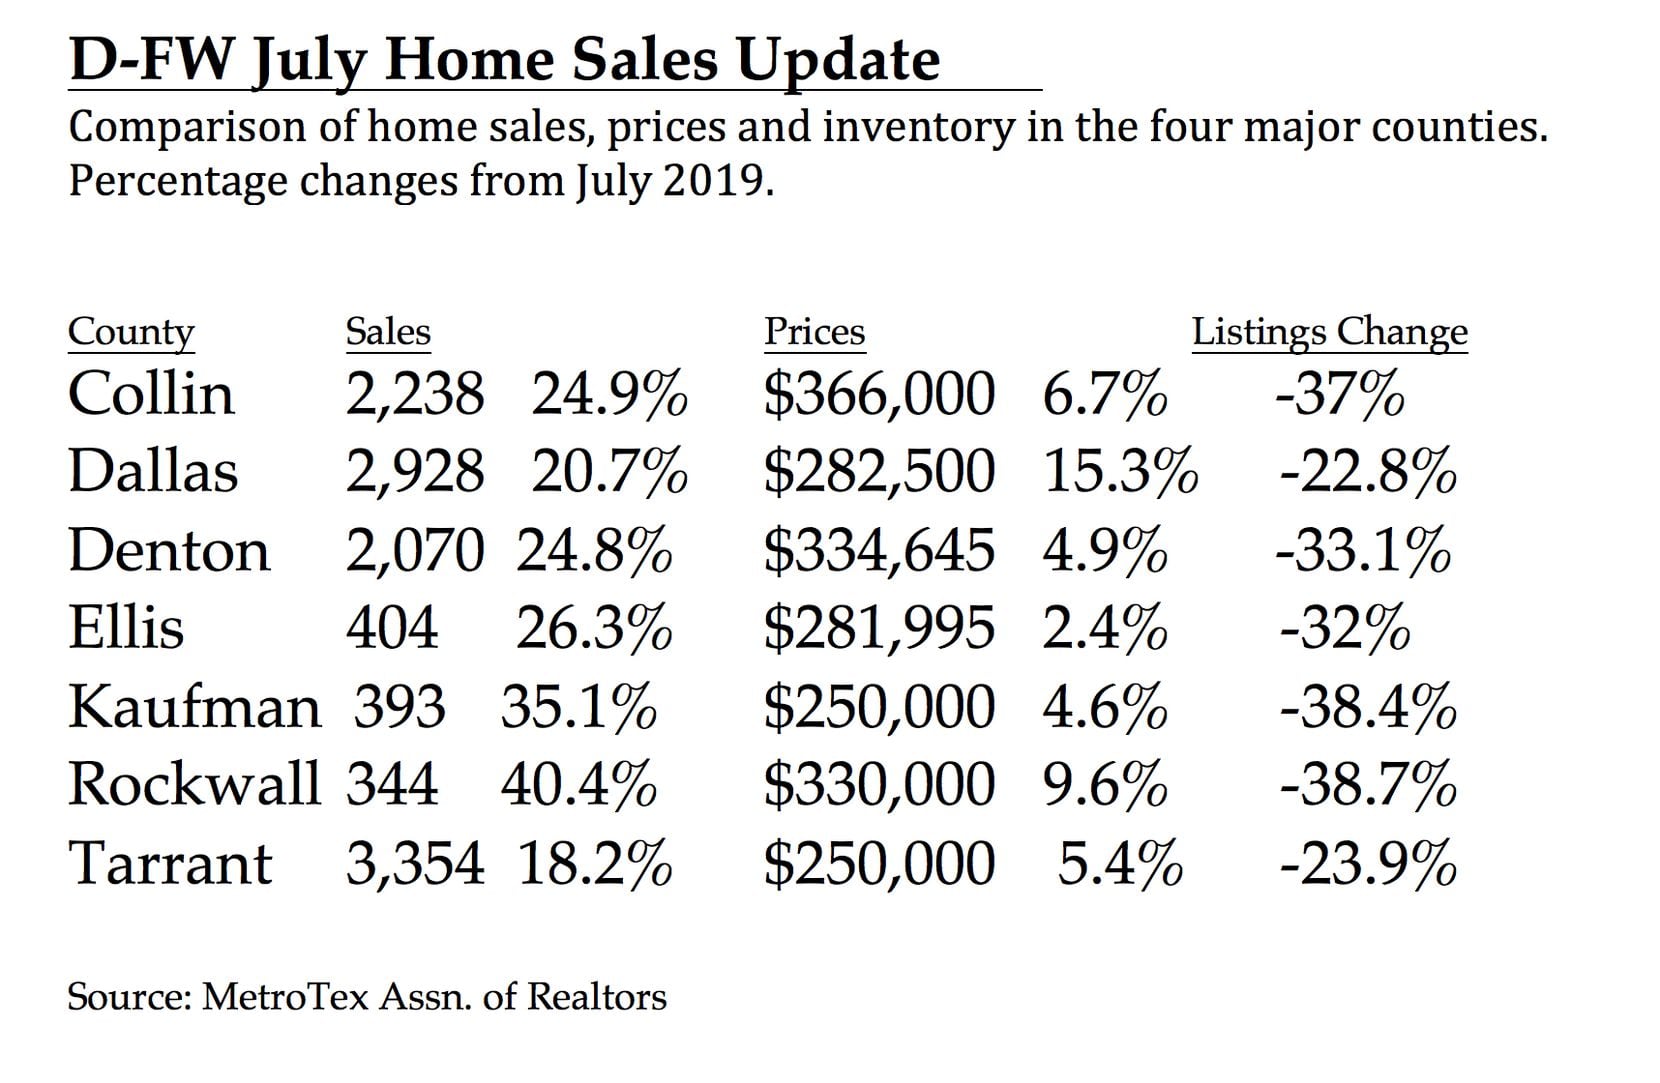 Dallas County led North Texas in home price gains.